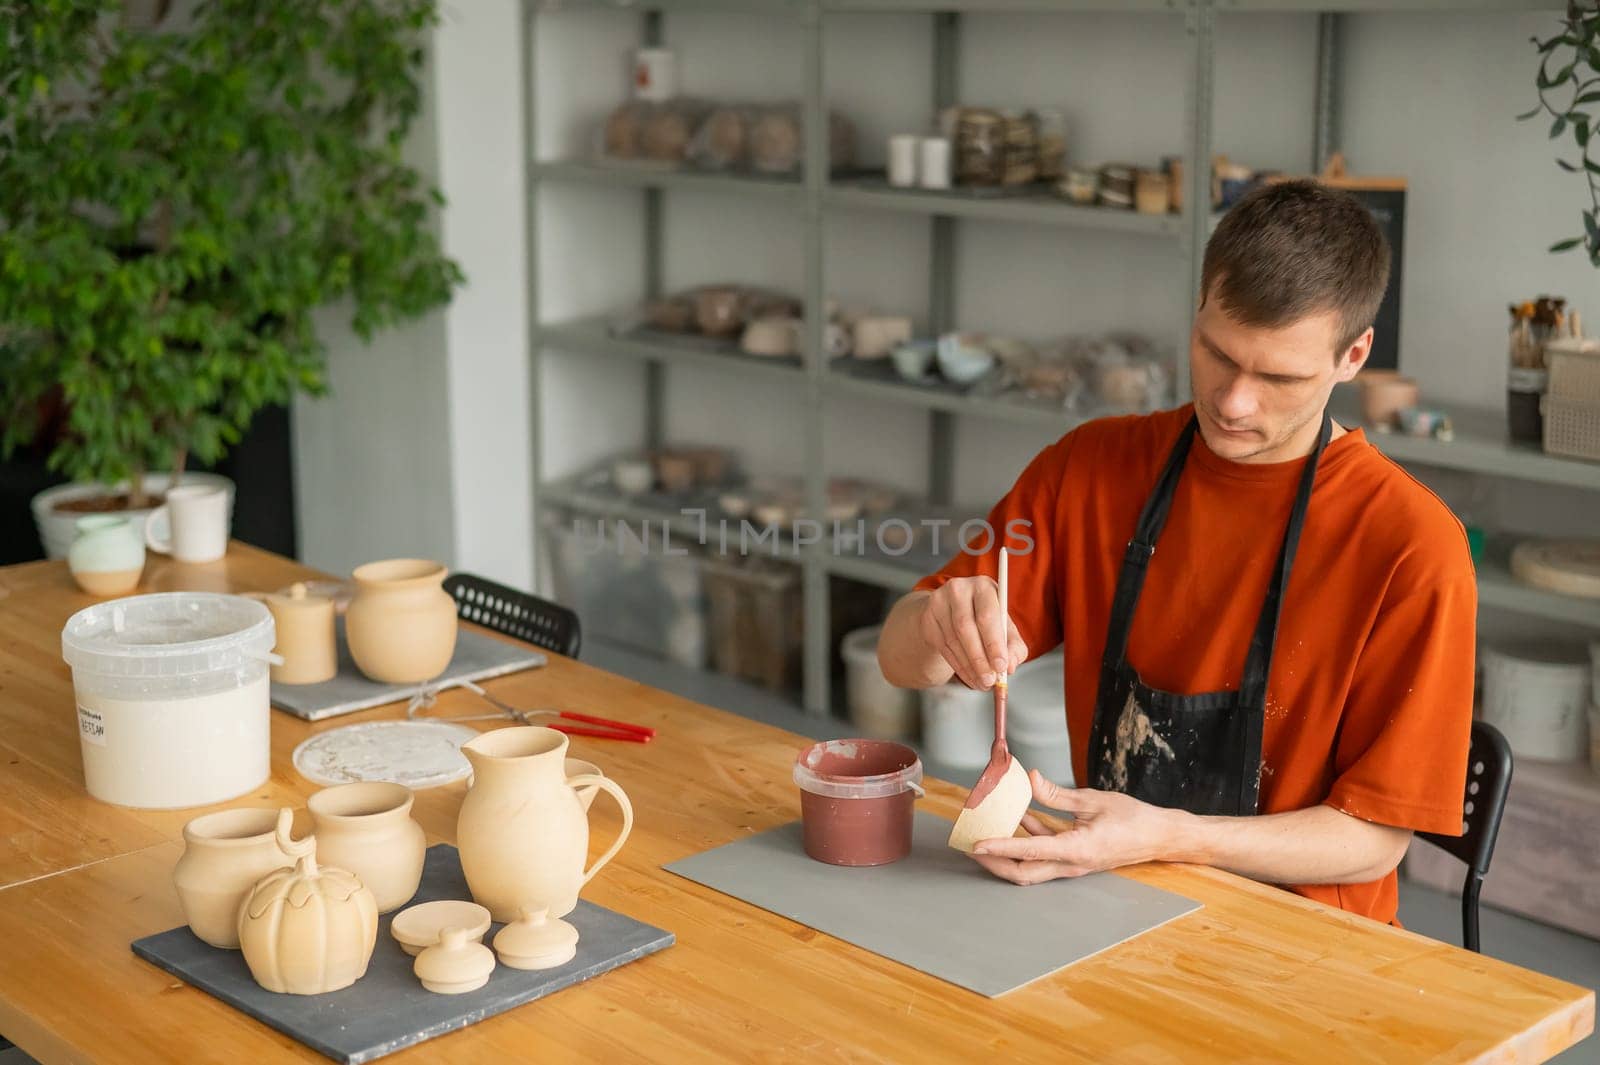 Potter paints ceramic dishes with a brush